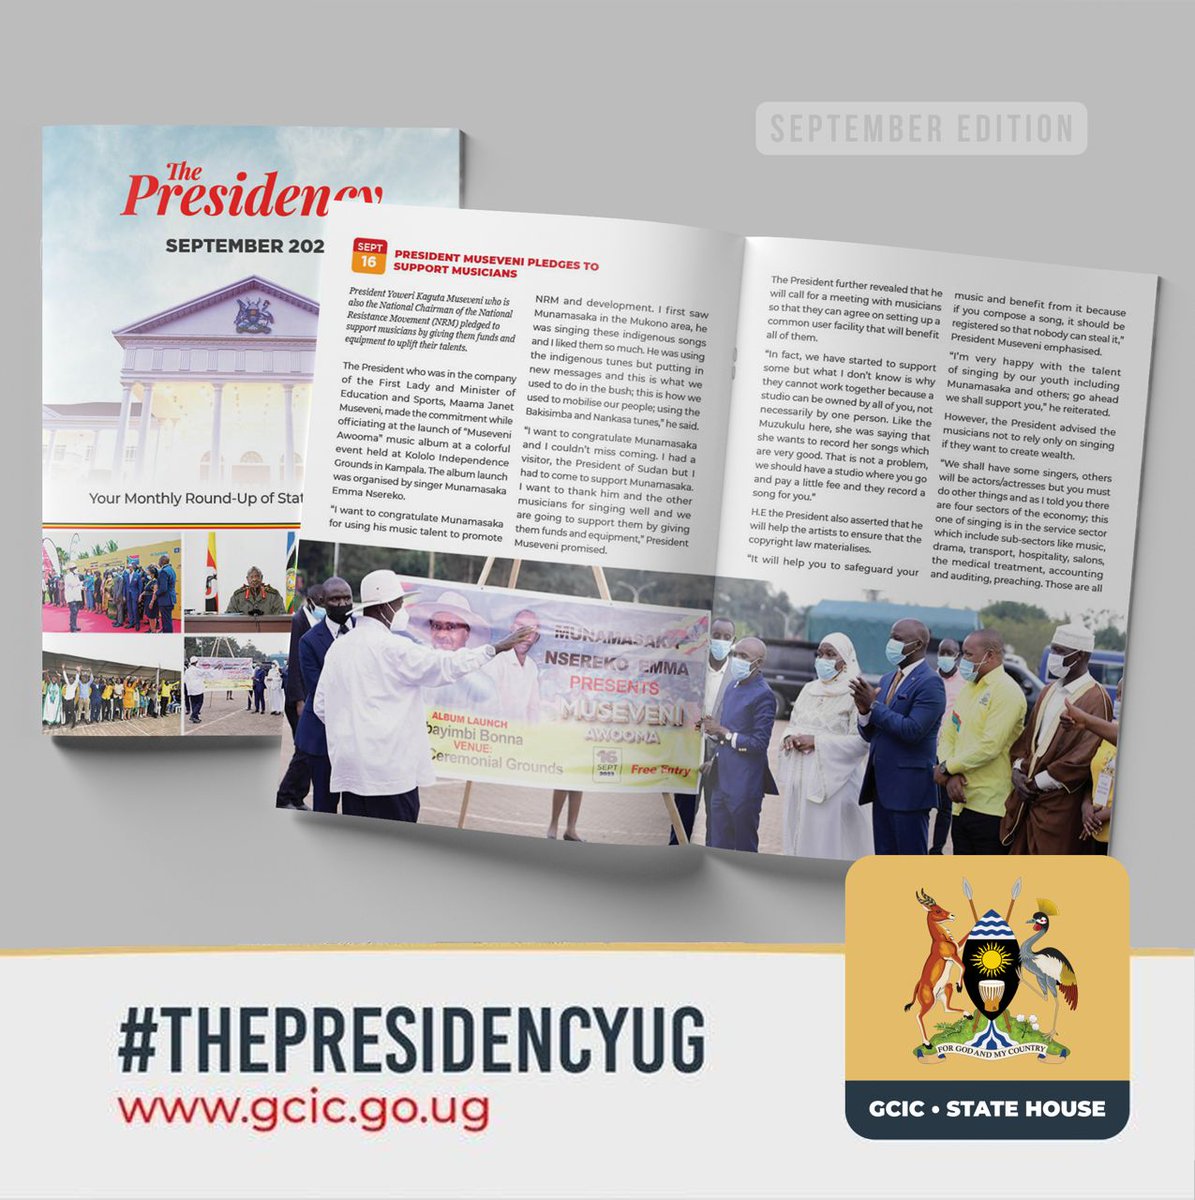 𝗦𝗲𝗽𝘁𝗲𝗺𝗯𝗲𝗿 𝗜𝘀𝘀𝘂𝗲:#ThePresidencyUG

To gain an understanding of every interaction the president had, visit this link: gcic.go.ug/the-presidency….